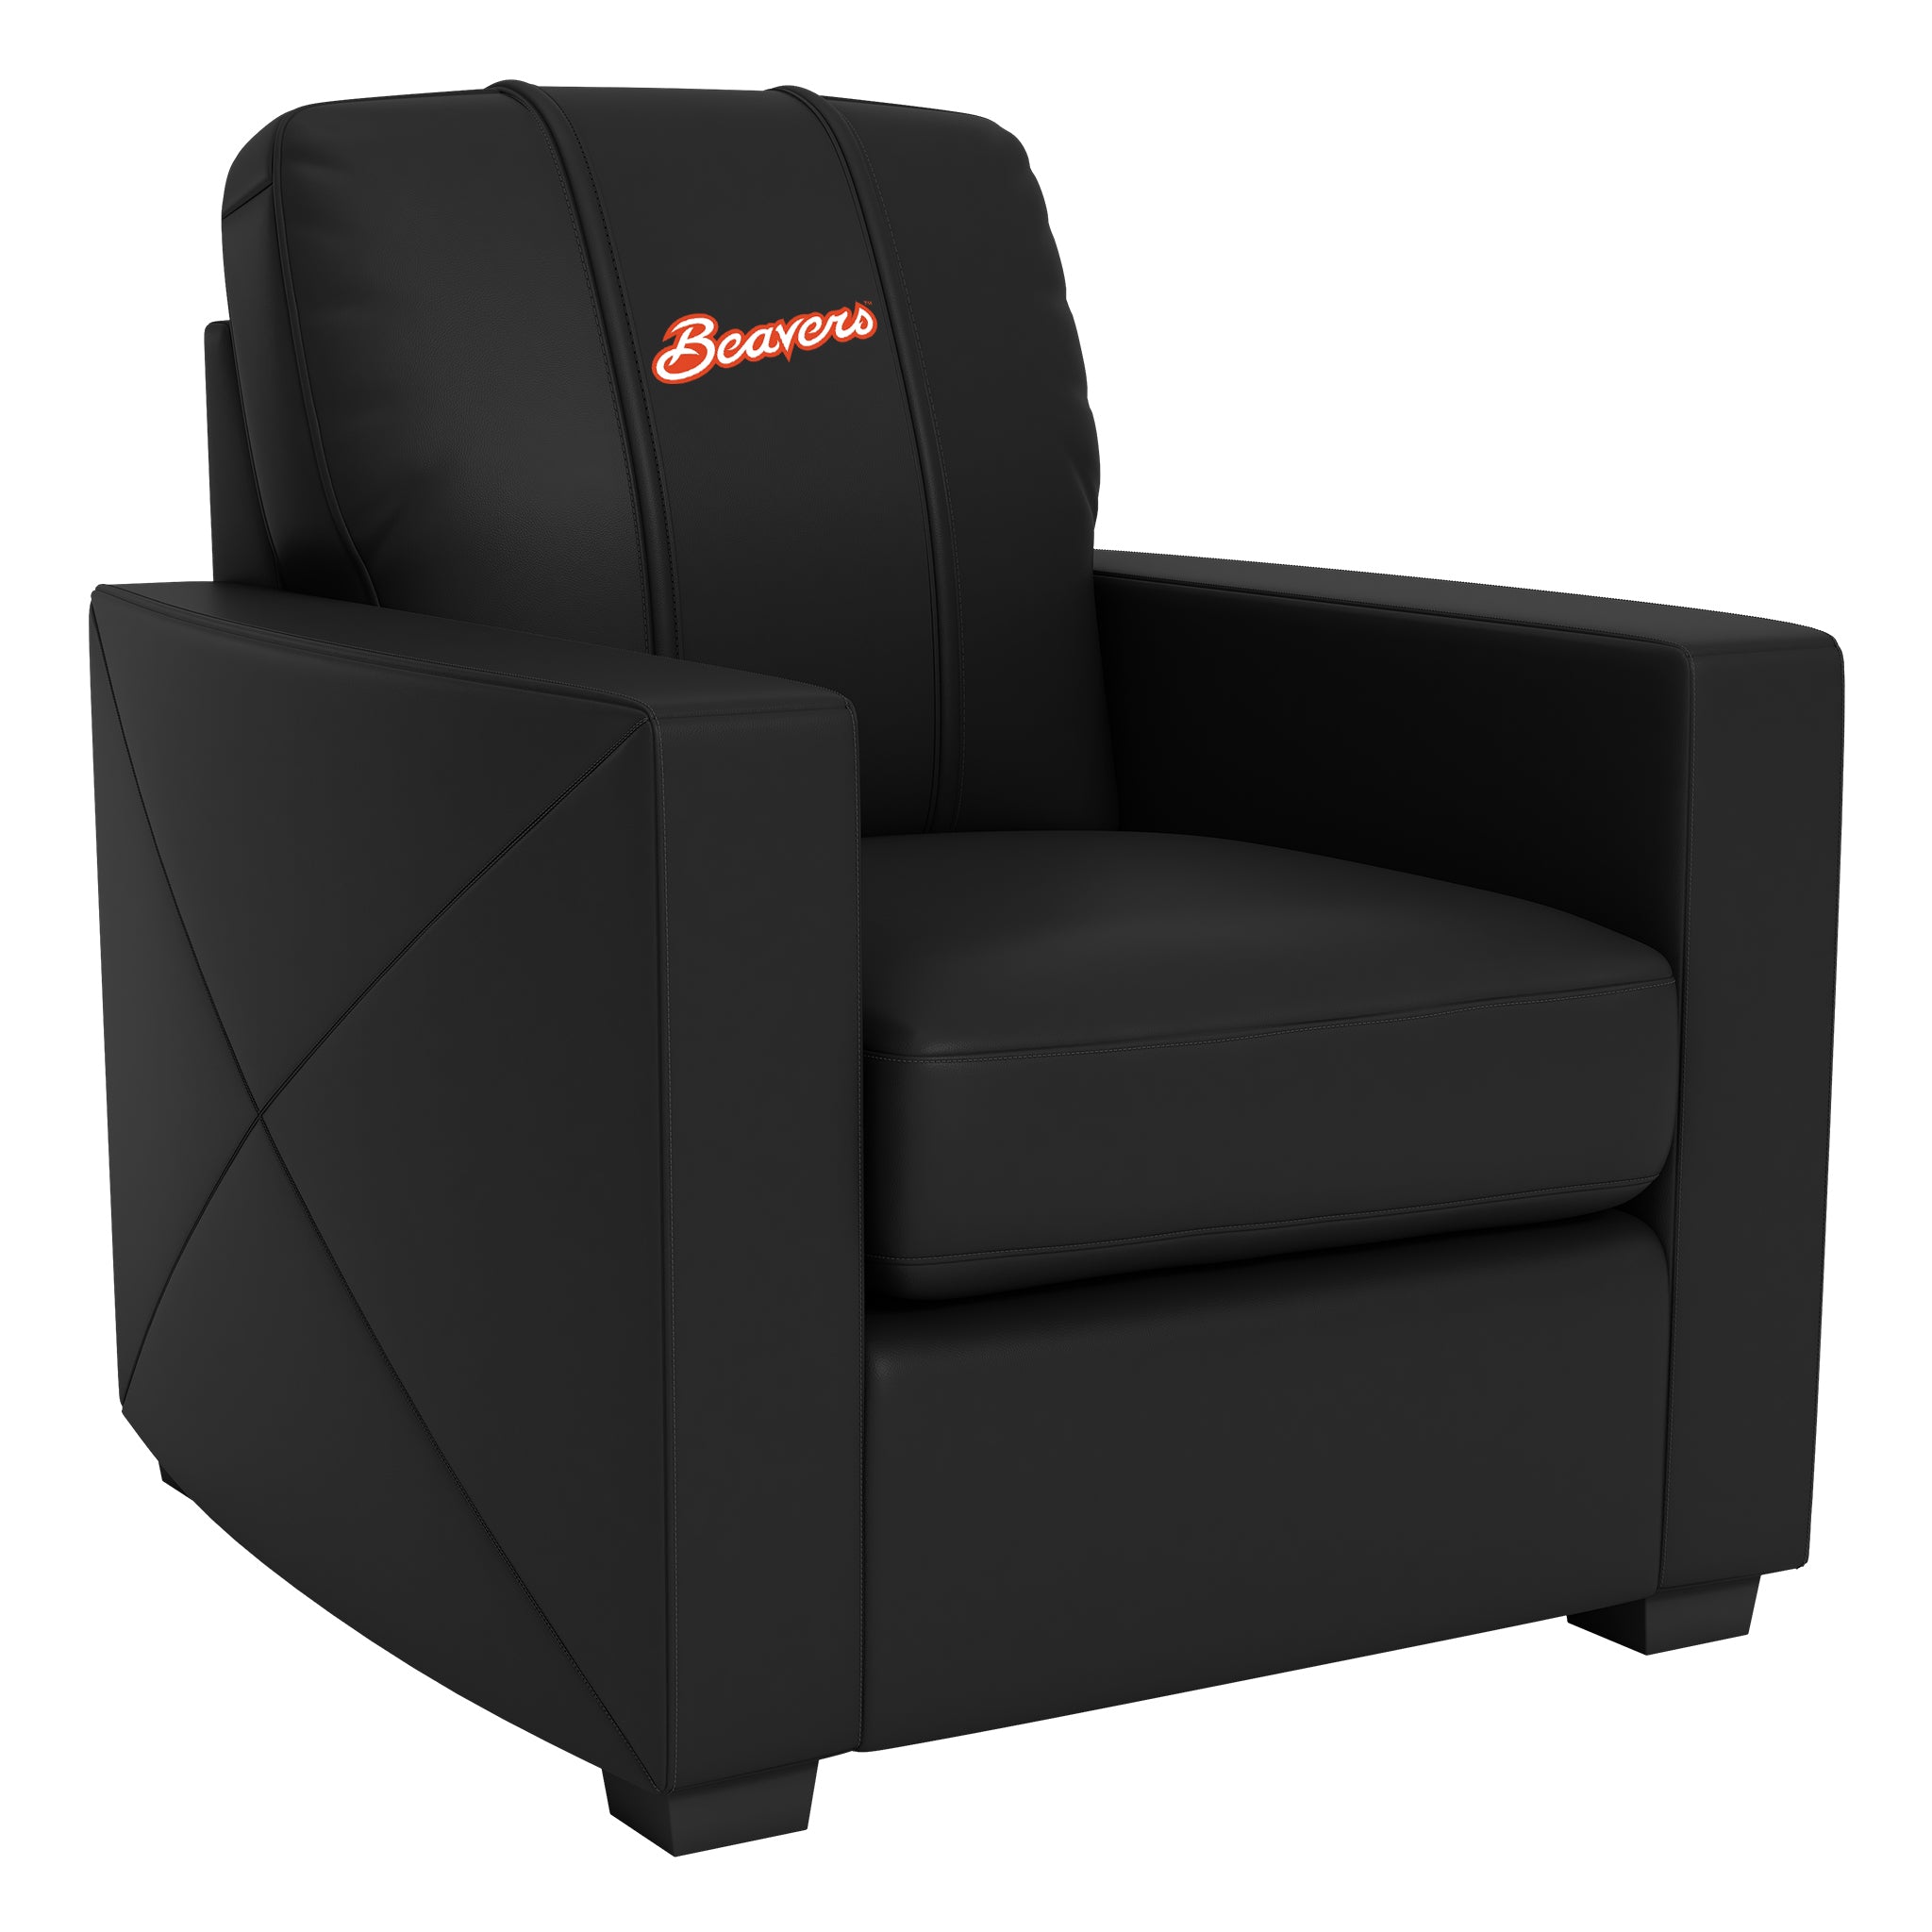 Oregon State Silver Club Chair with Oregon State Primary Logo